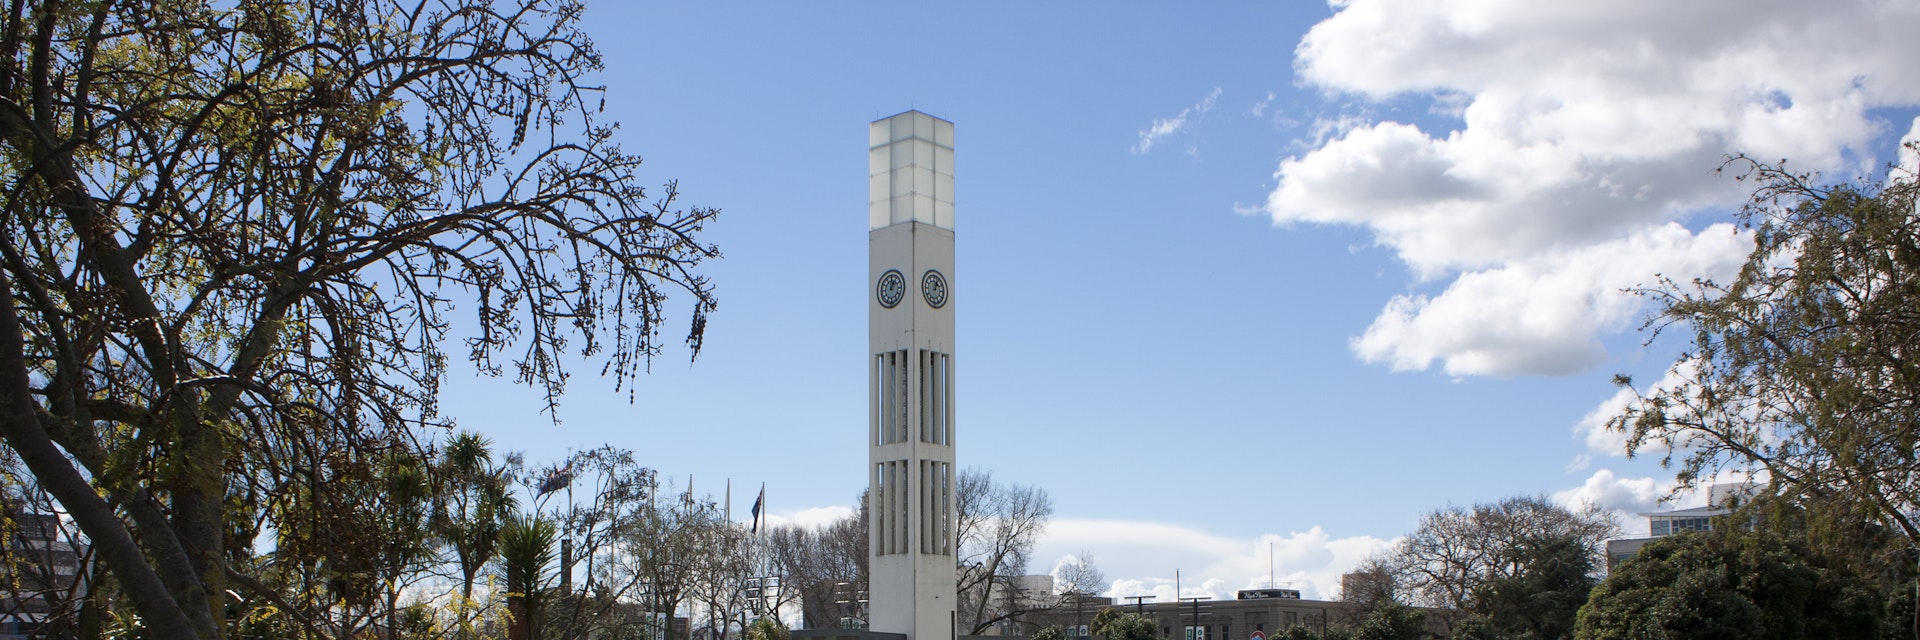 Central clock tower in the square, Palmerston North, New Zealand.